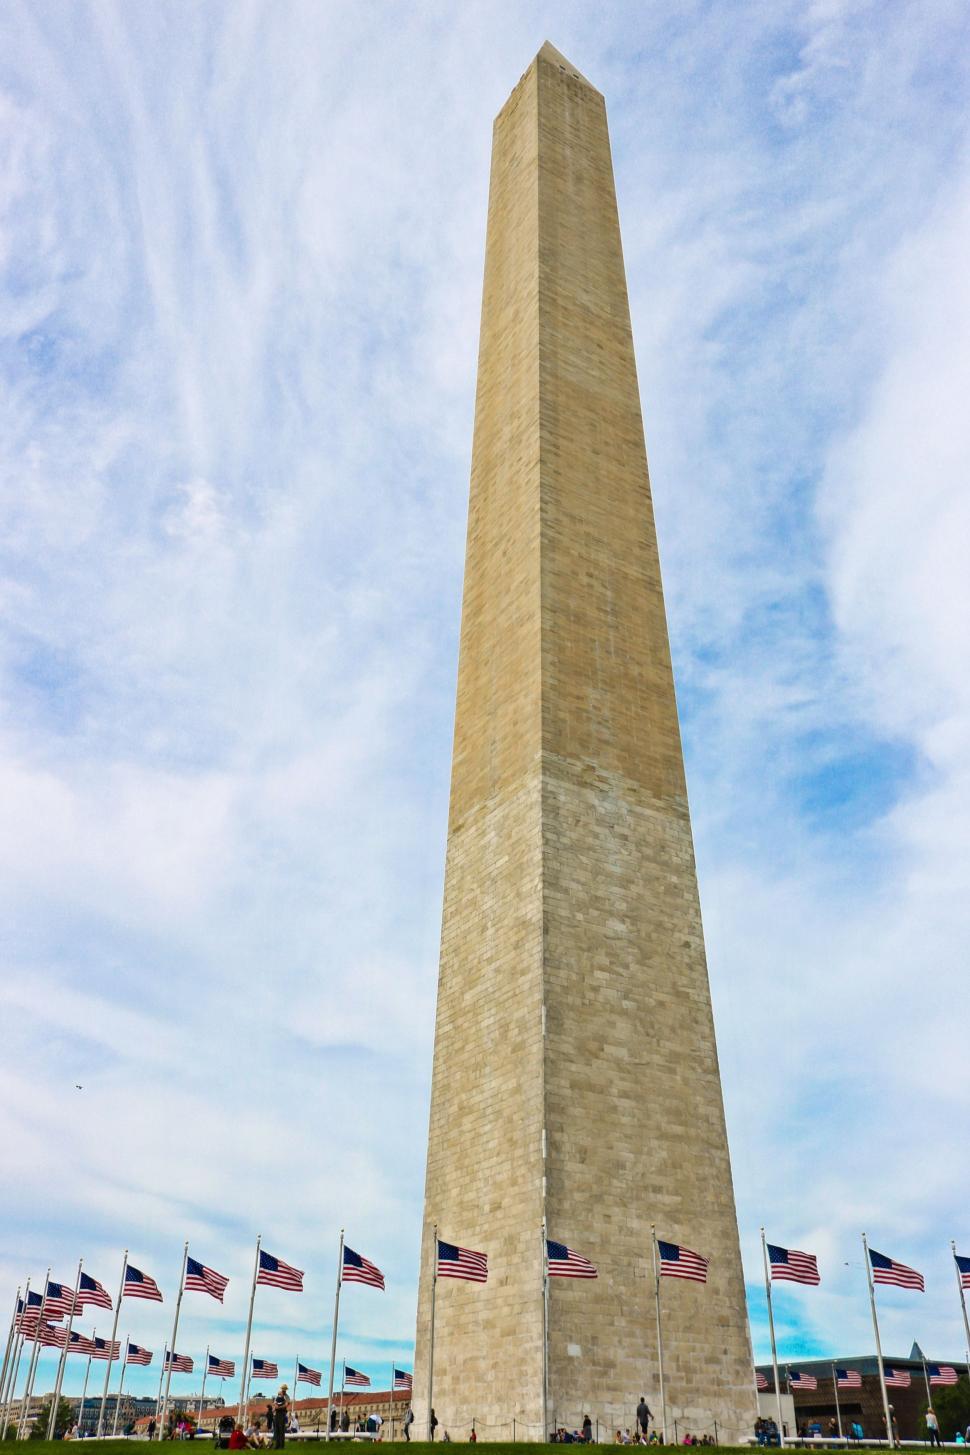 Free Image of Washington Monument Tower with US Flags 